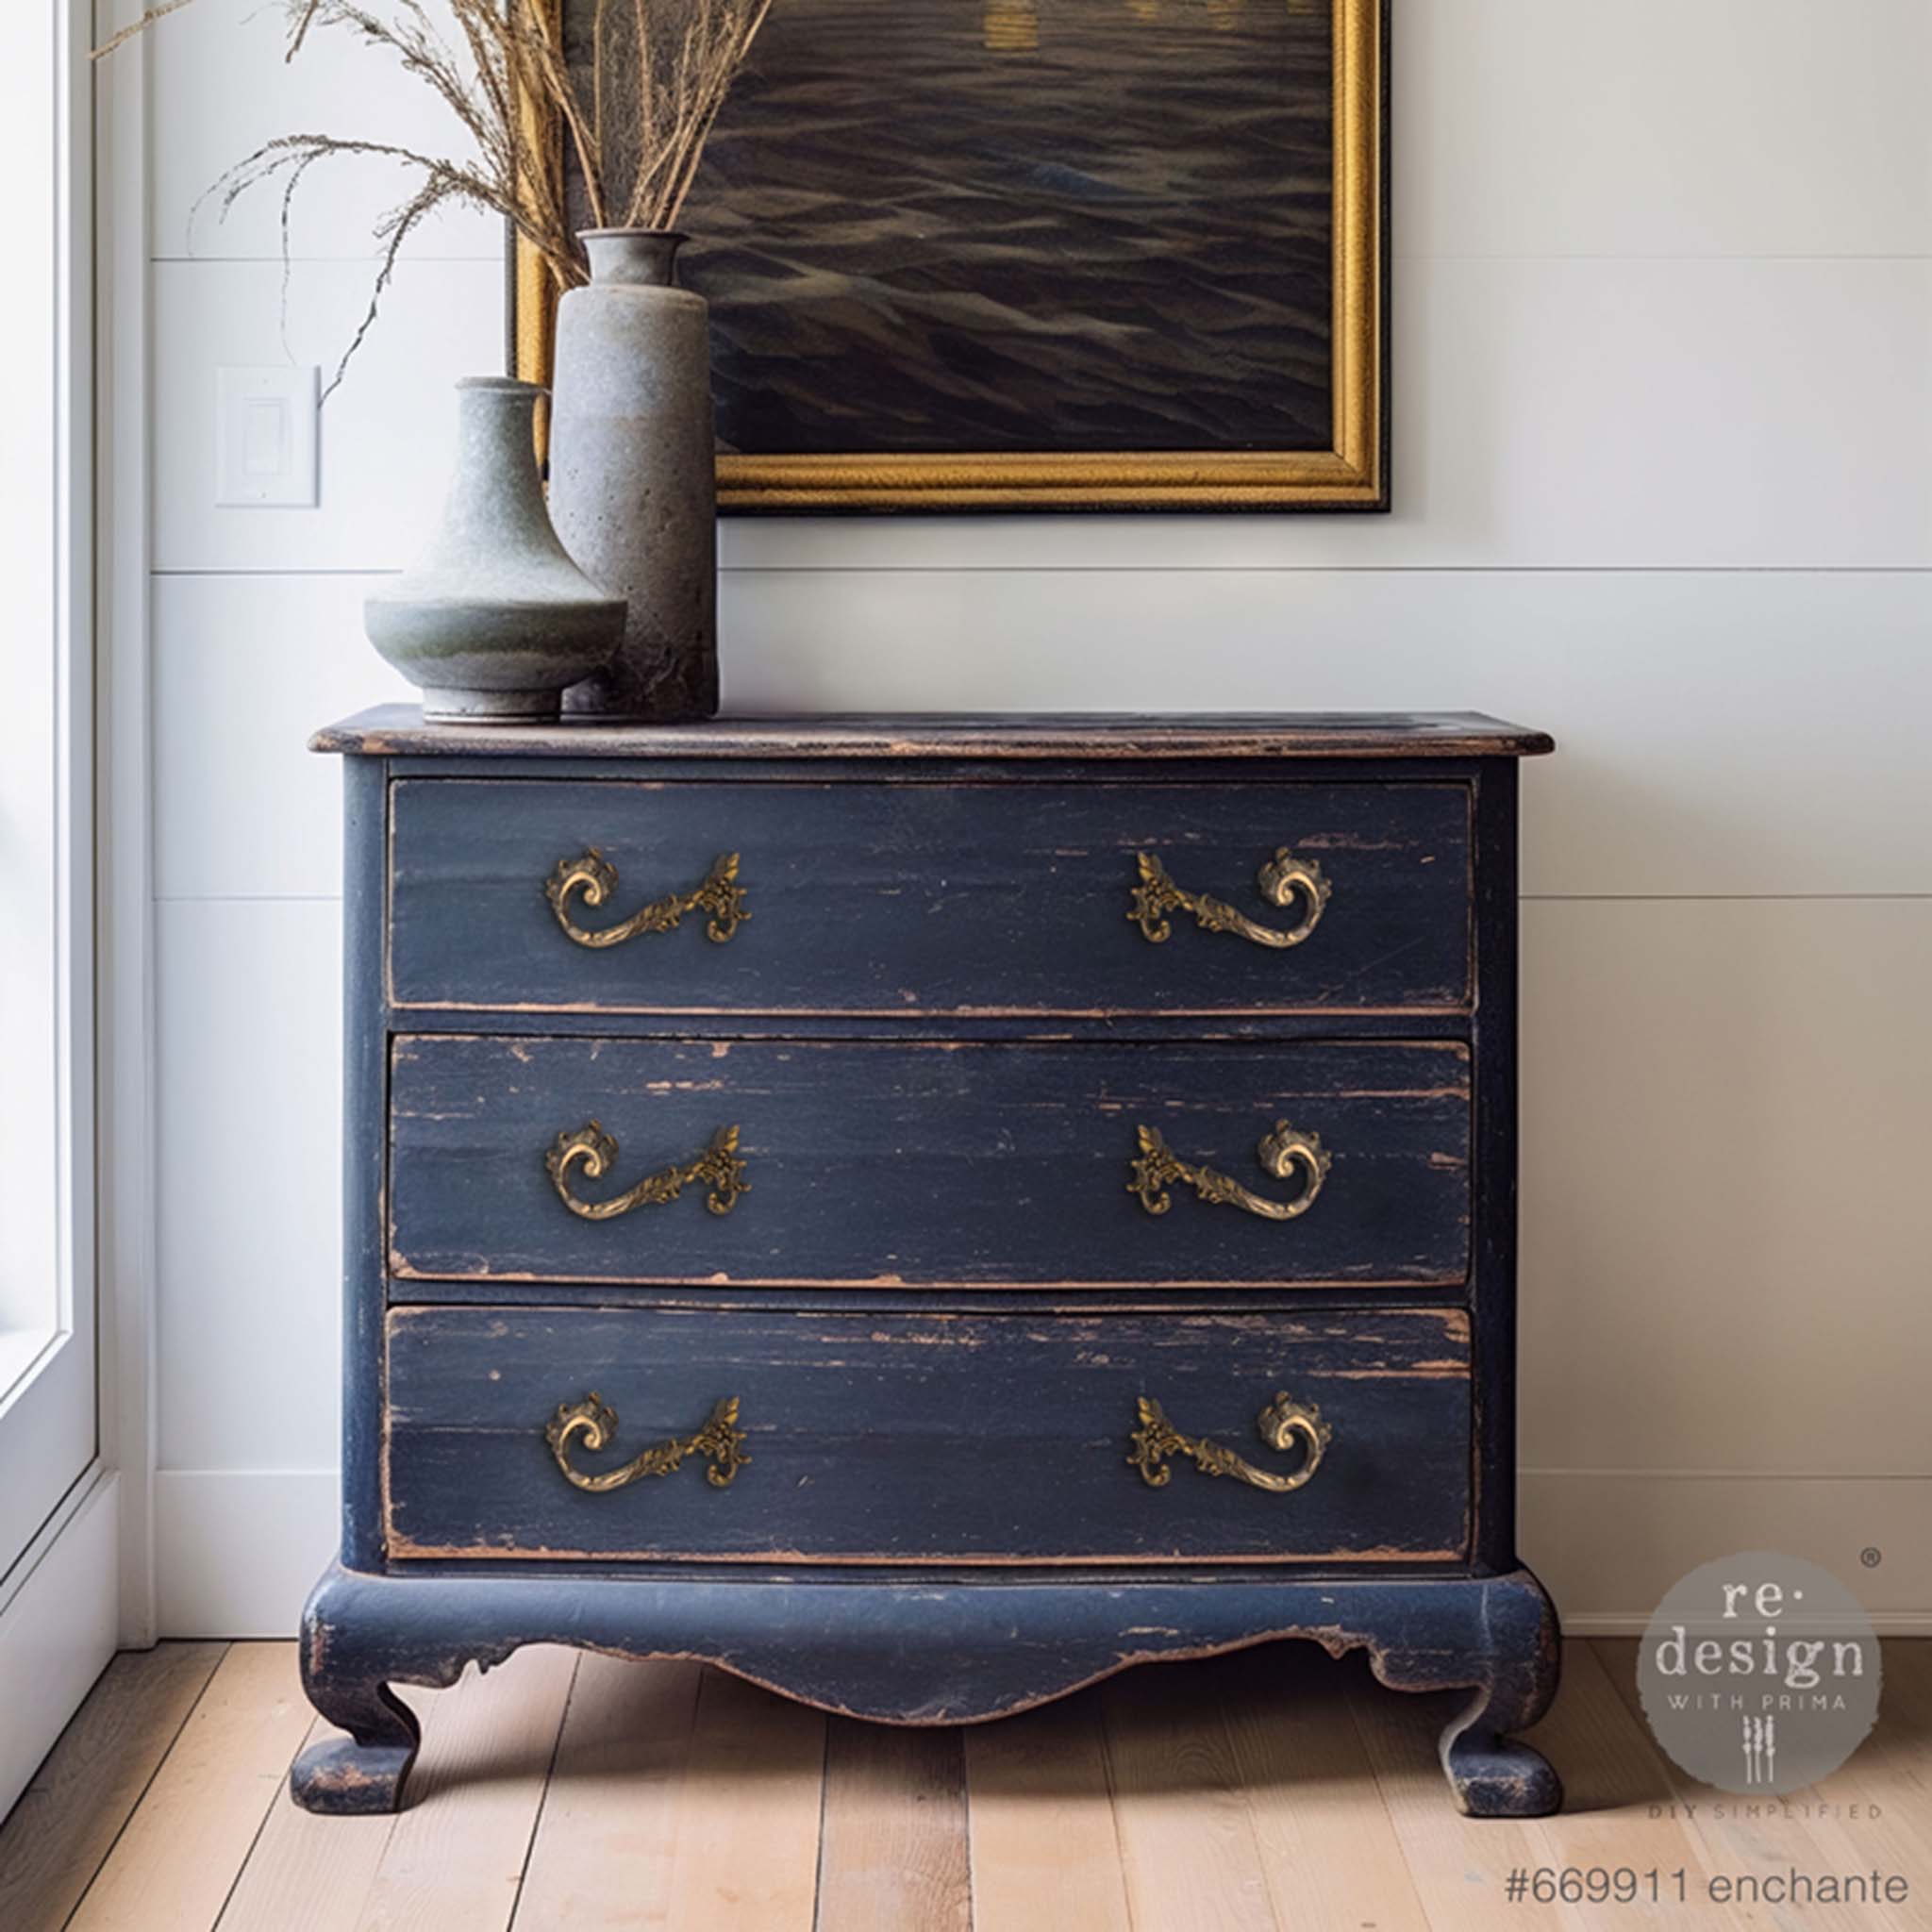 A vintage 3-drawer dresser is painted a weathered blue and features ReDesign with Prima's Enchante metal drawer pulls by Kacha.